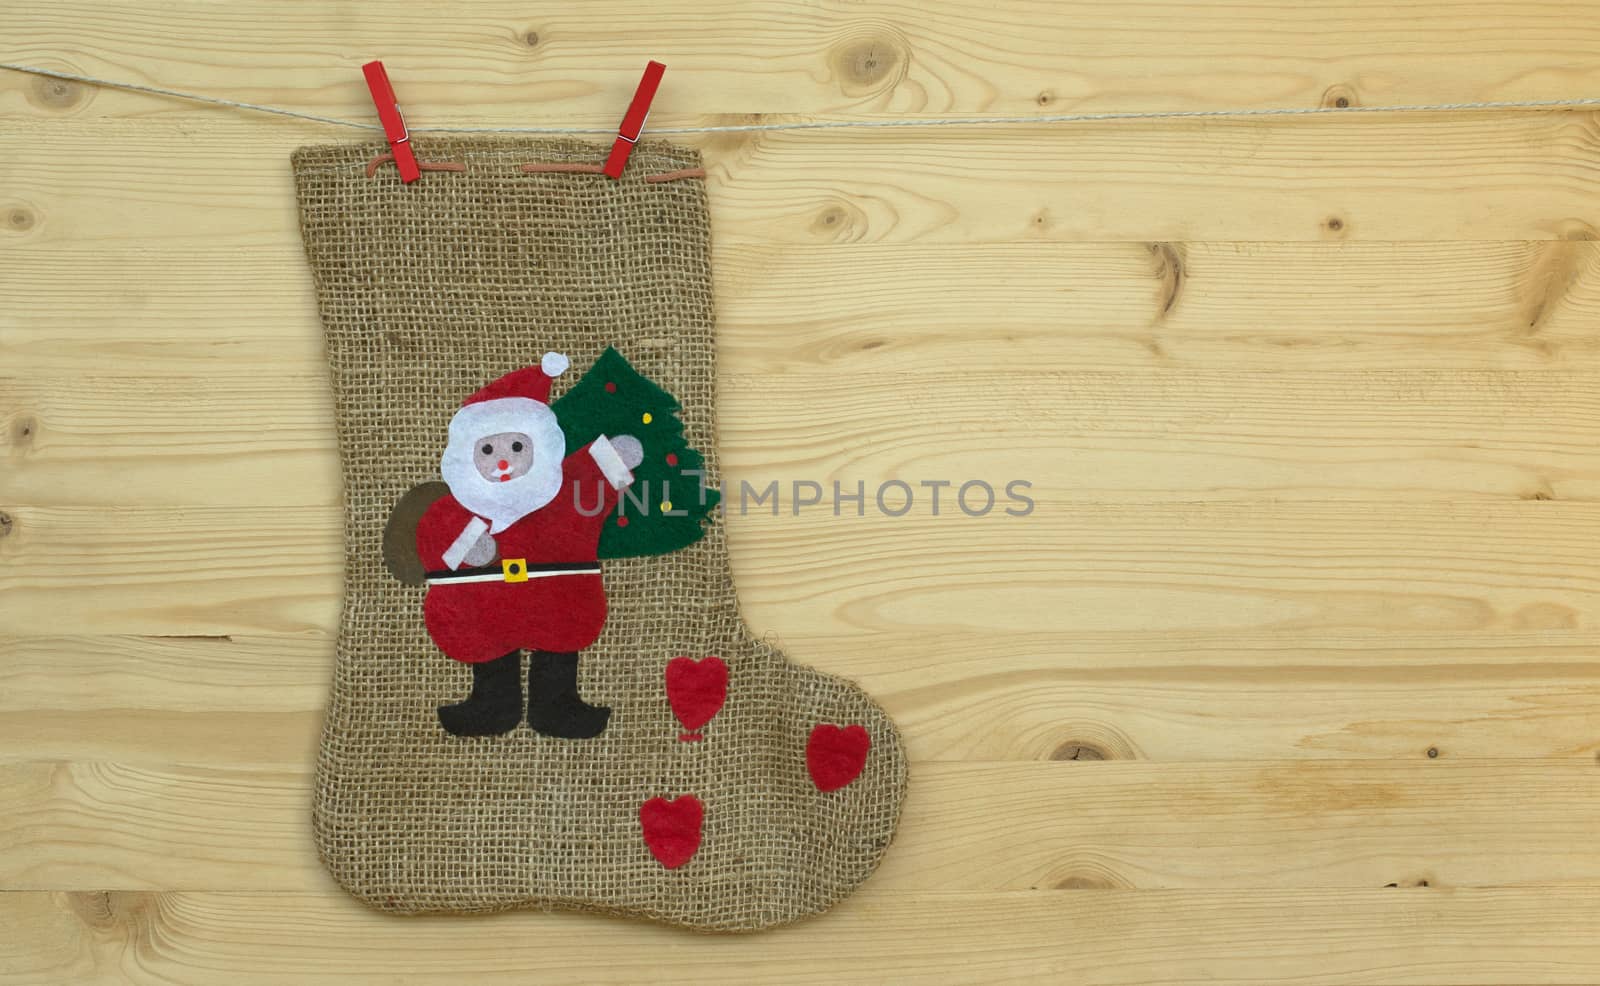 Christmas socks and the words Merry Christmas and a happy new year, christmas card